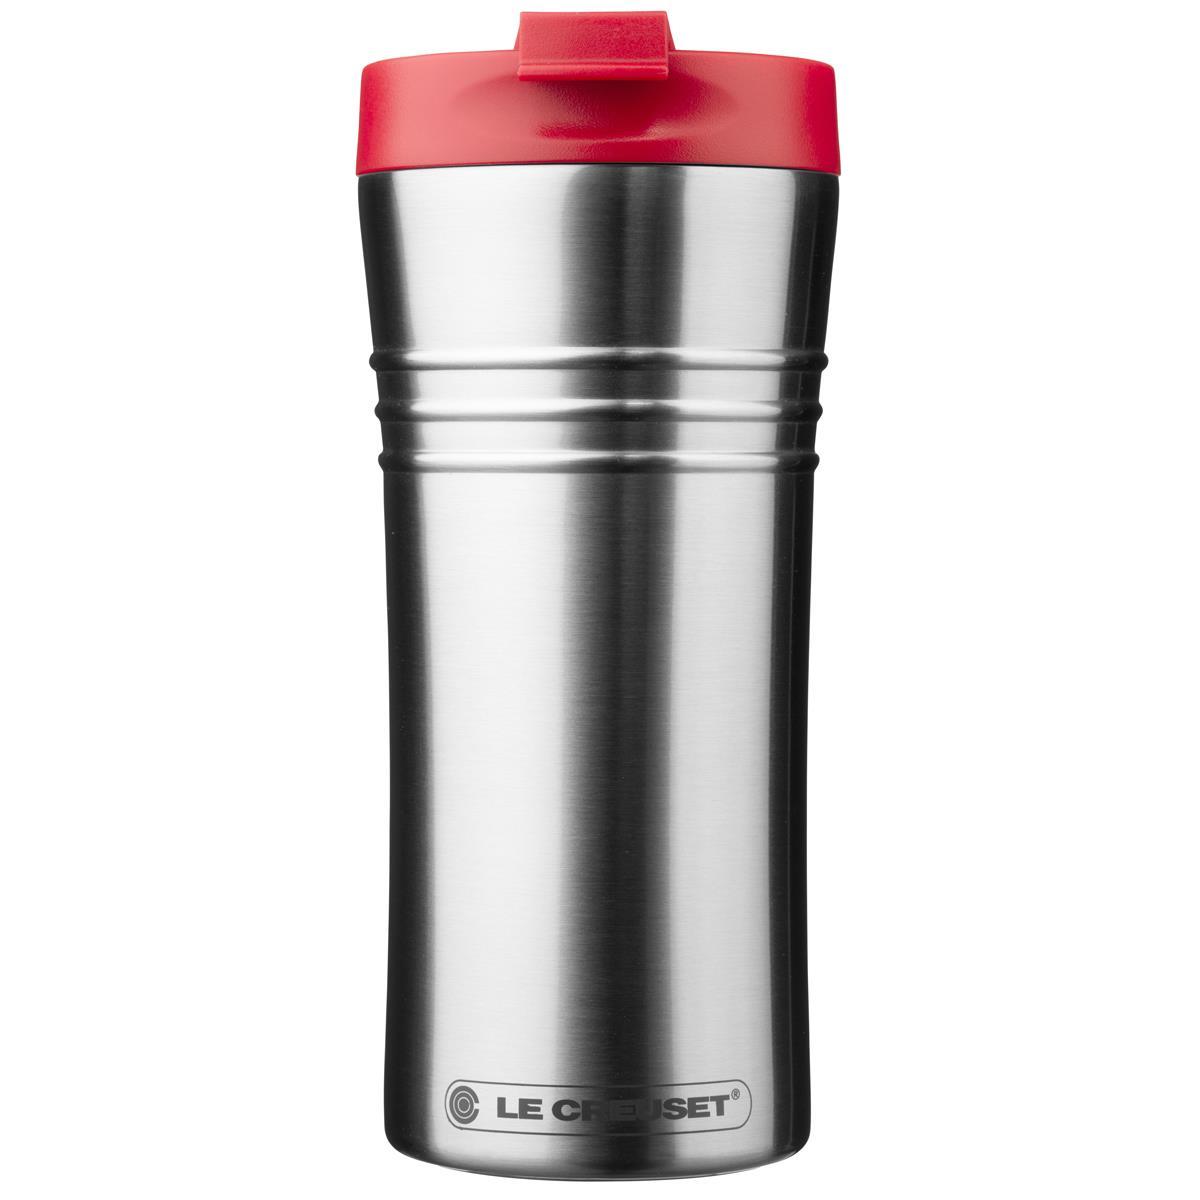 What slip resistance feature does the Le Creuset travel mug have?